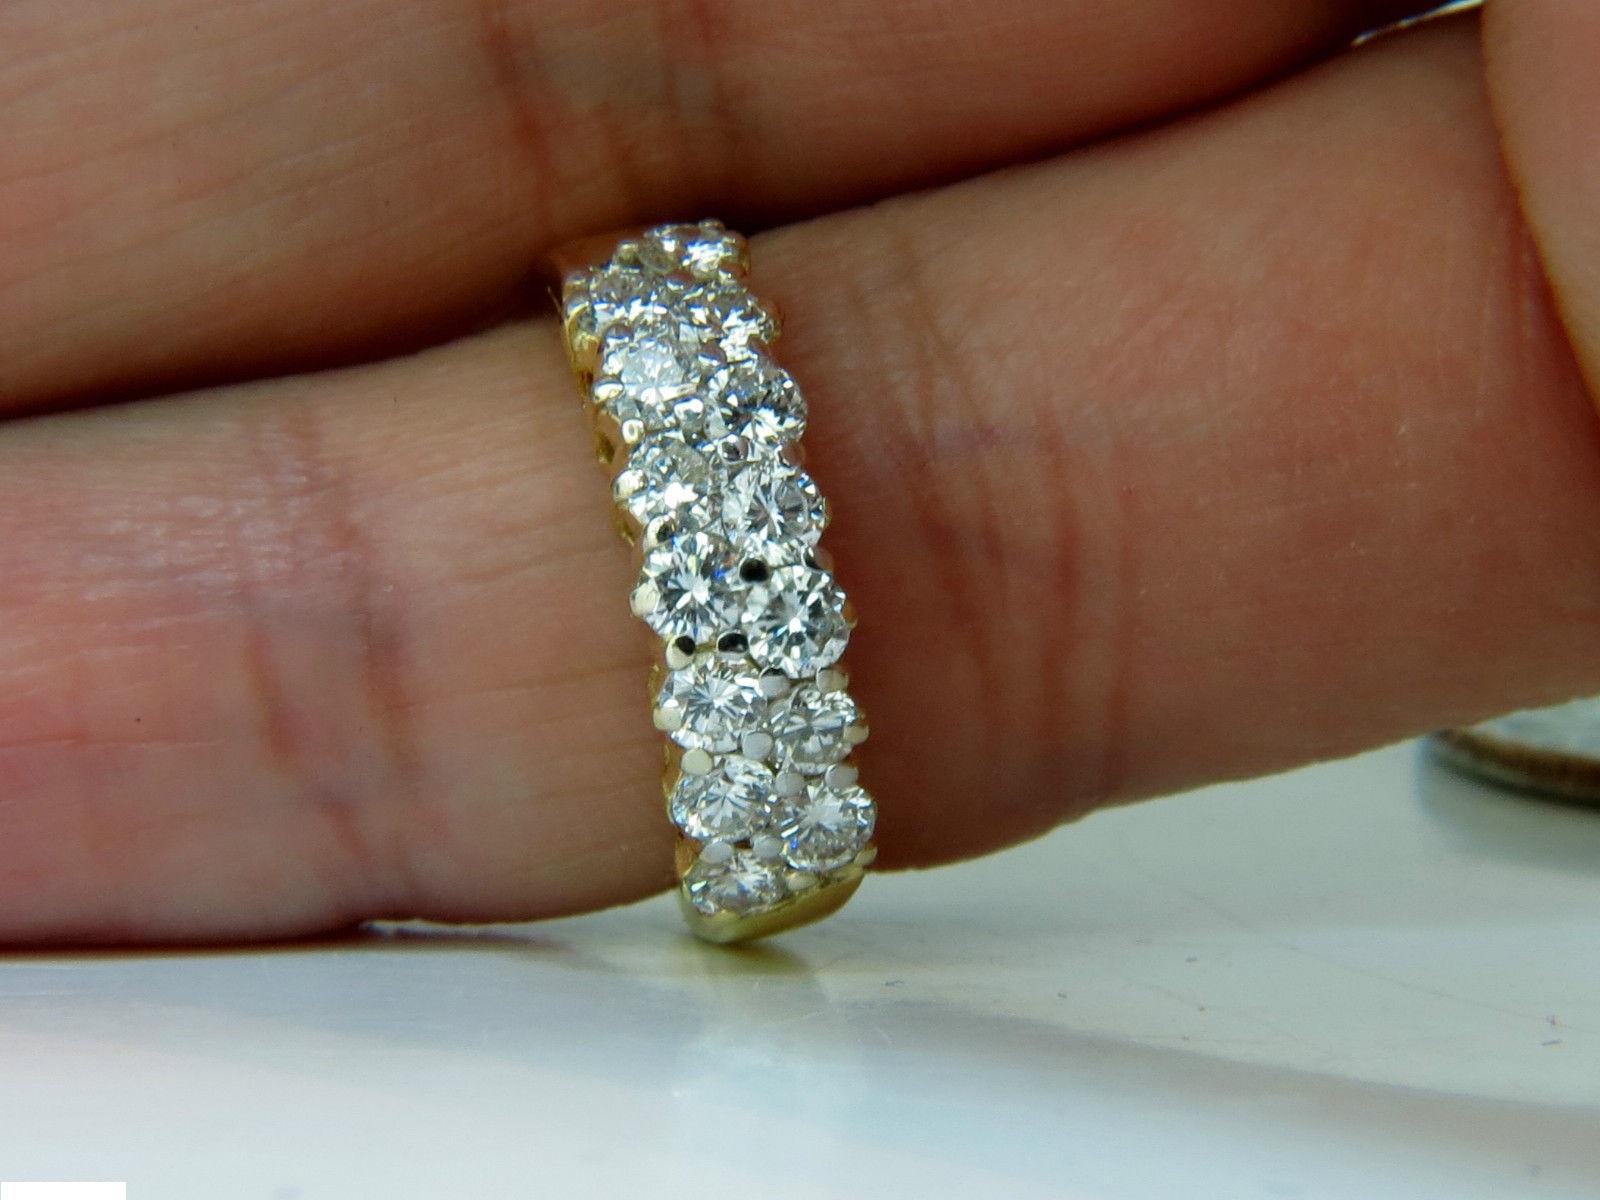 1.50ct. diamonds double row band.

14 diamonds in total

Gorgeous Ideal cut

G-color Vs-1 Vs-2 clairty

4.5 grams.

18kt. yellow gold

Size 4.5 (possible to resize, please inquire)

$5000 appraisal will accompany